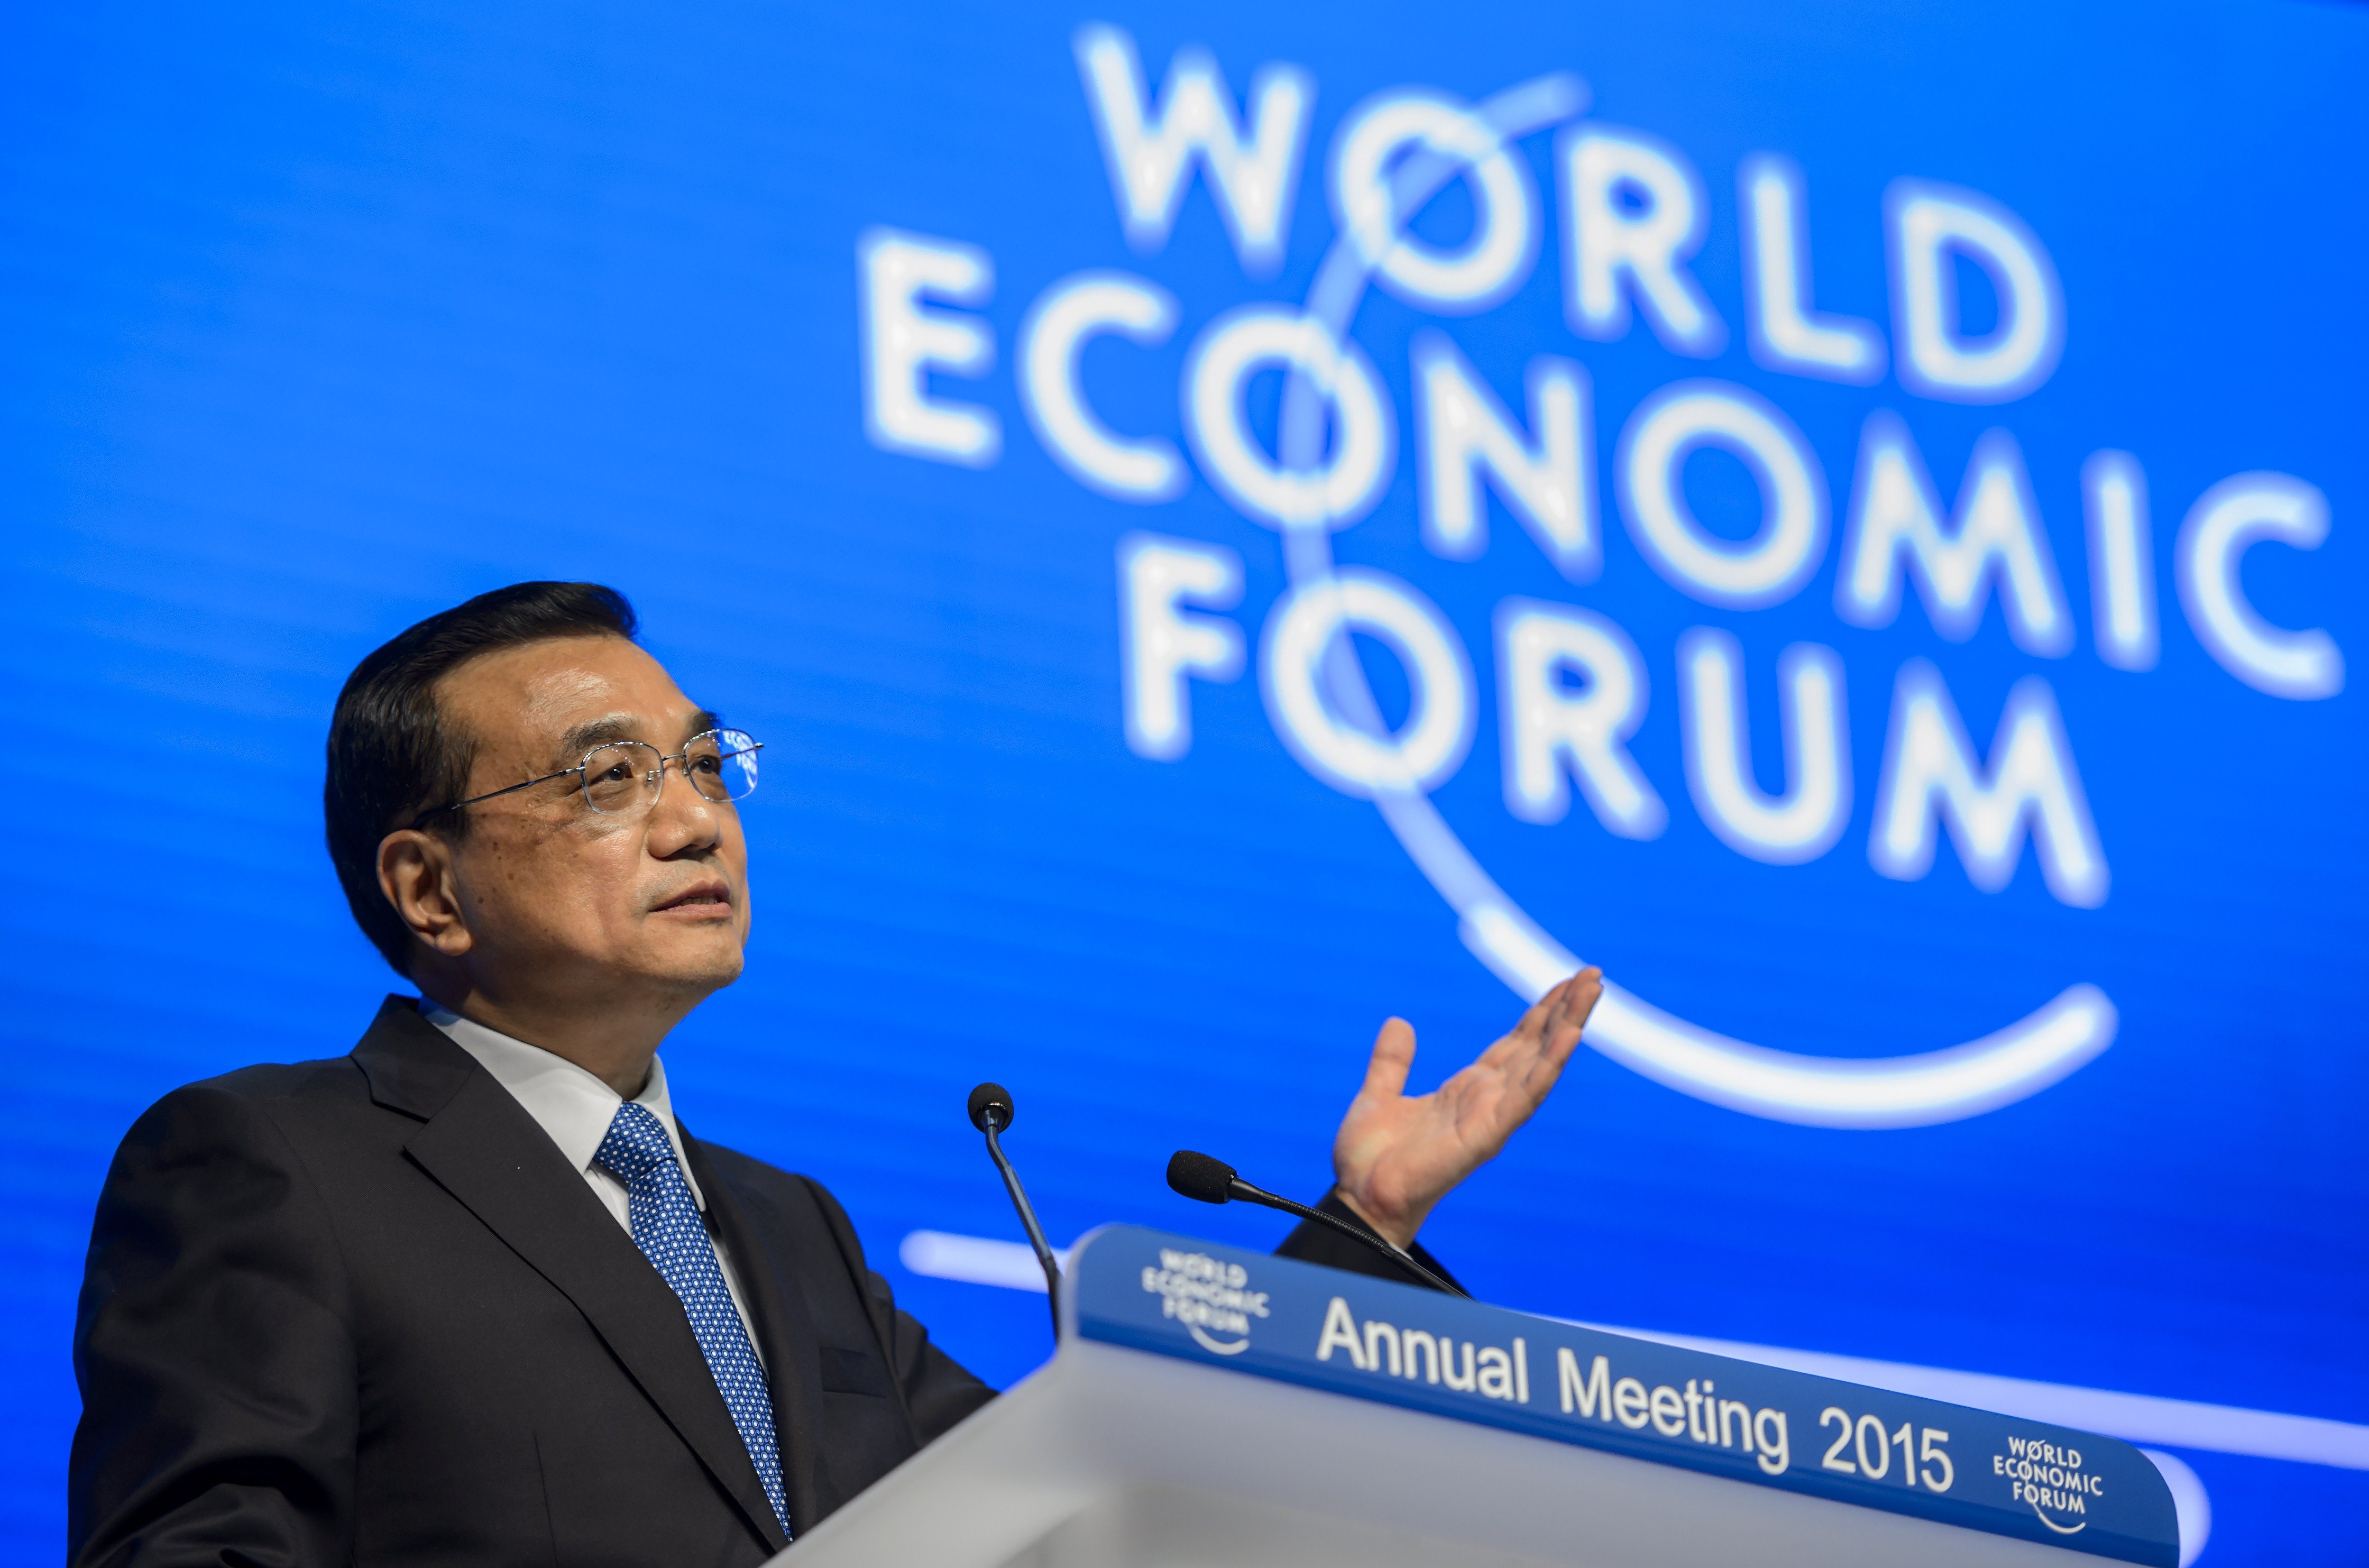 Chinese Premier Li Keqiang attends a session of the World Economic Forum (WEF) annual meeting on Jan. 21, 2015 in Davos, Switzerland.